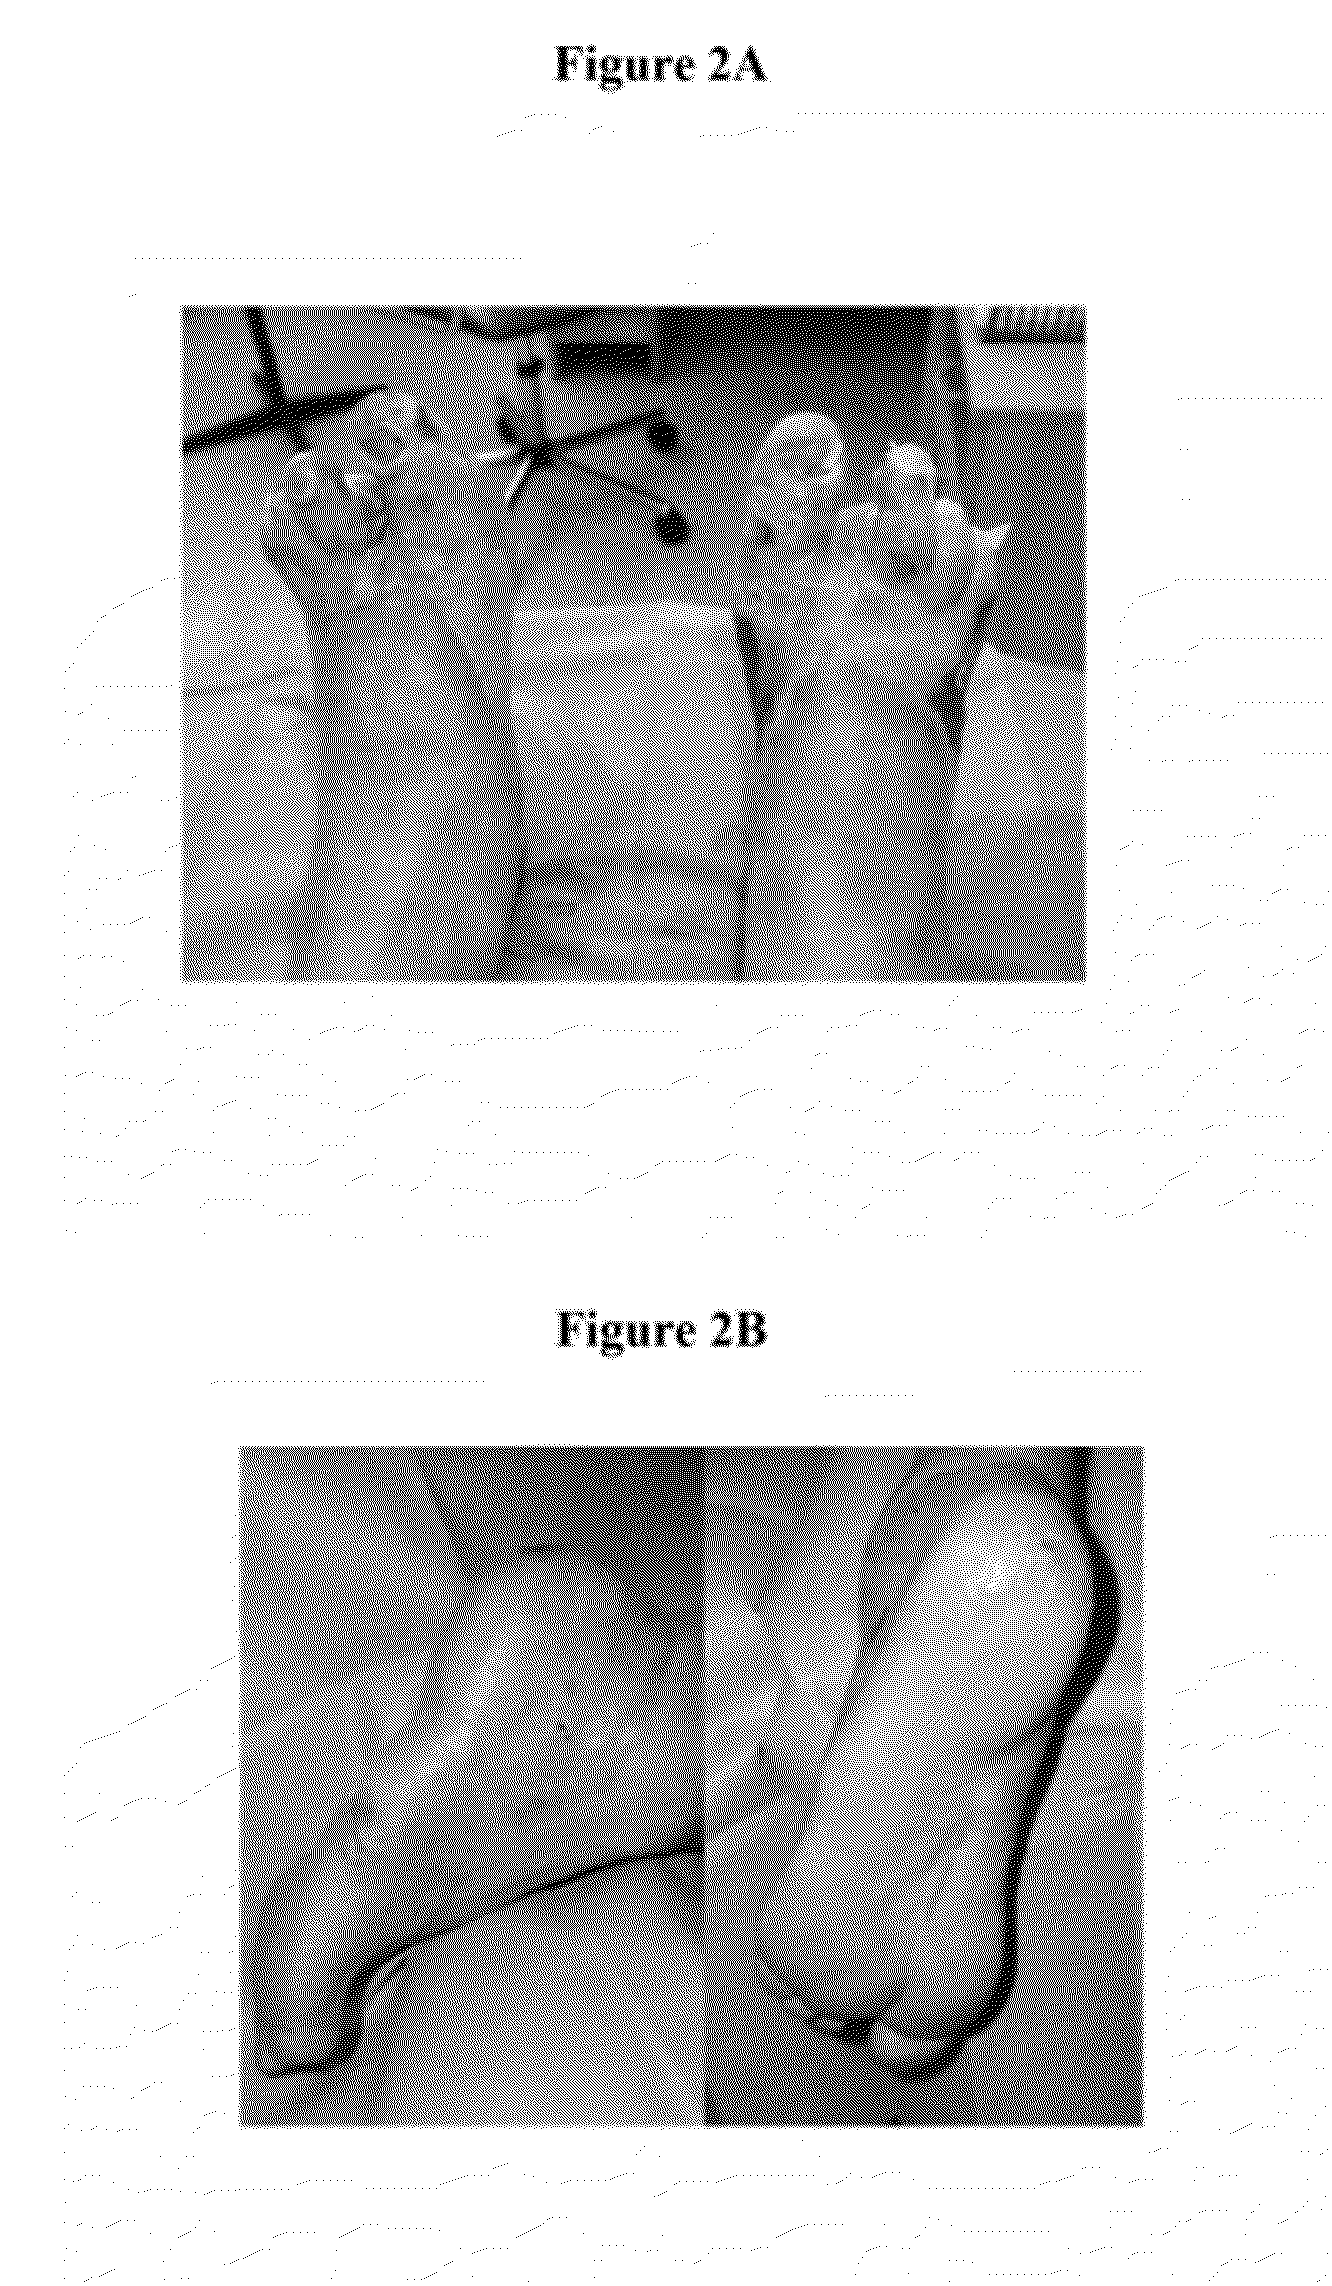 Methods and materials for treating burn injuries